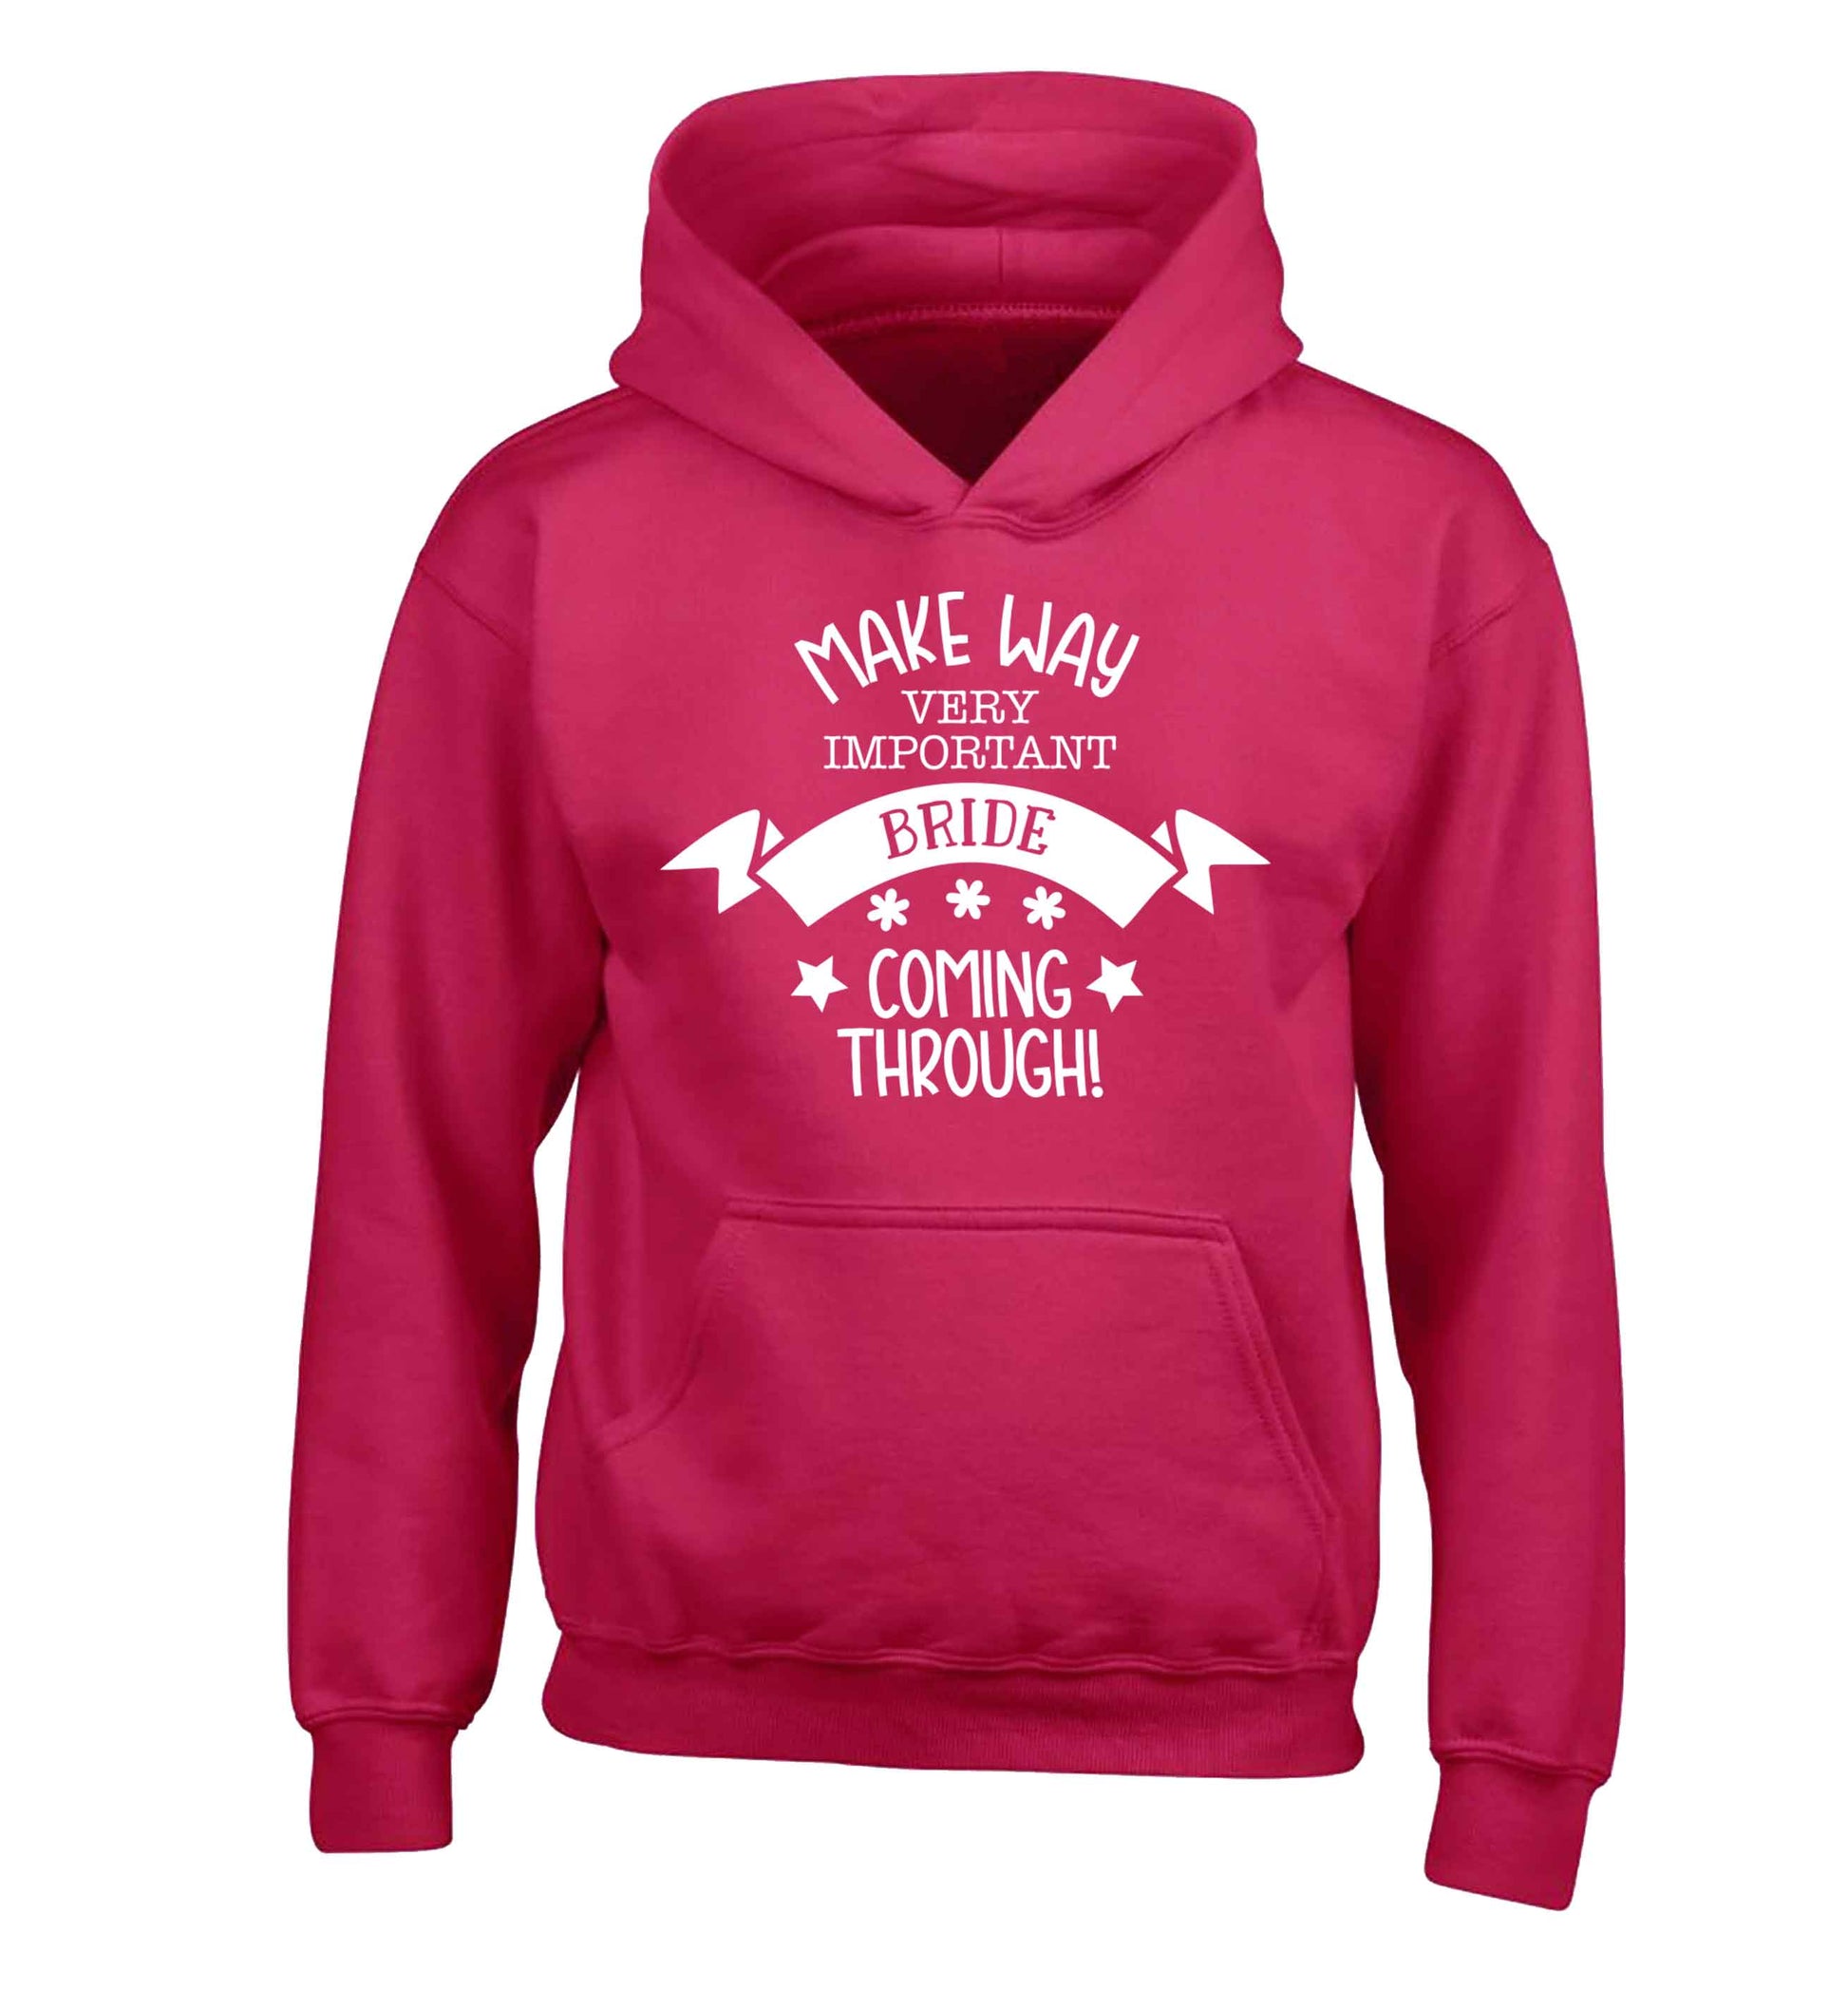 Make way V.I.P very important bride coming through! children's pink hoodie 12-13 Years